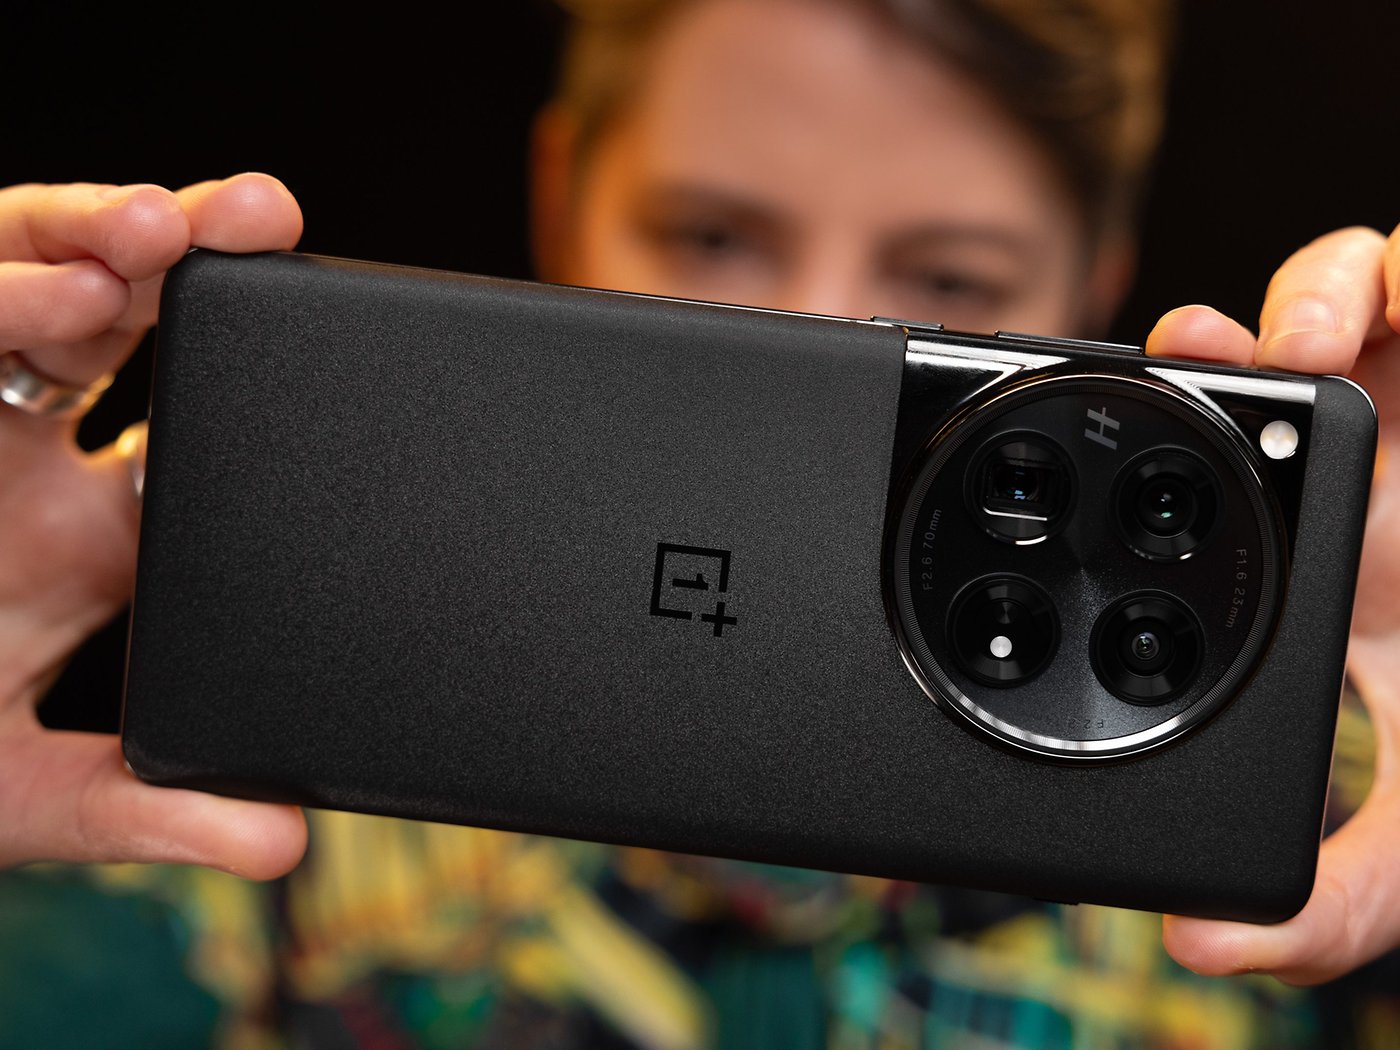 OnePlus 10 Pro 5G review: Two steps forward, one step back